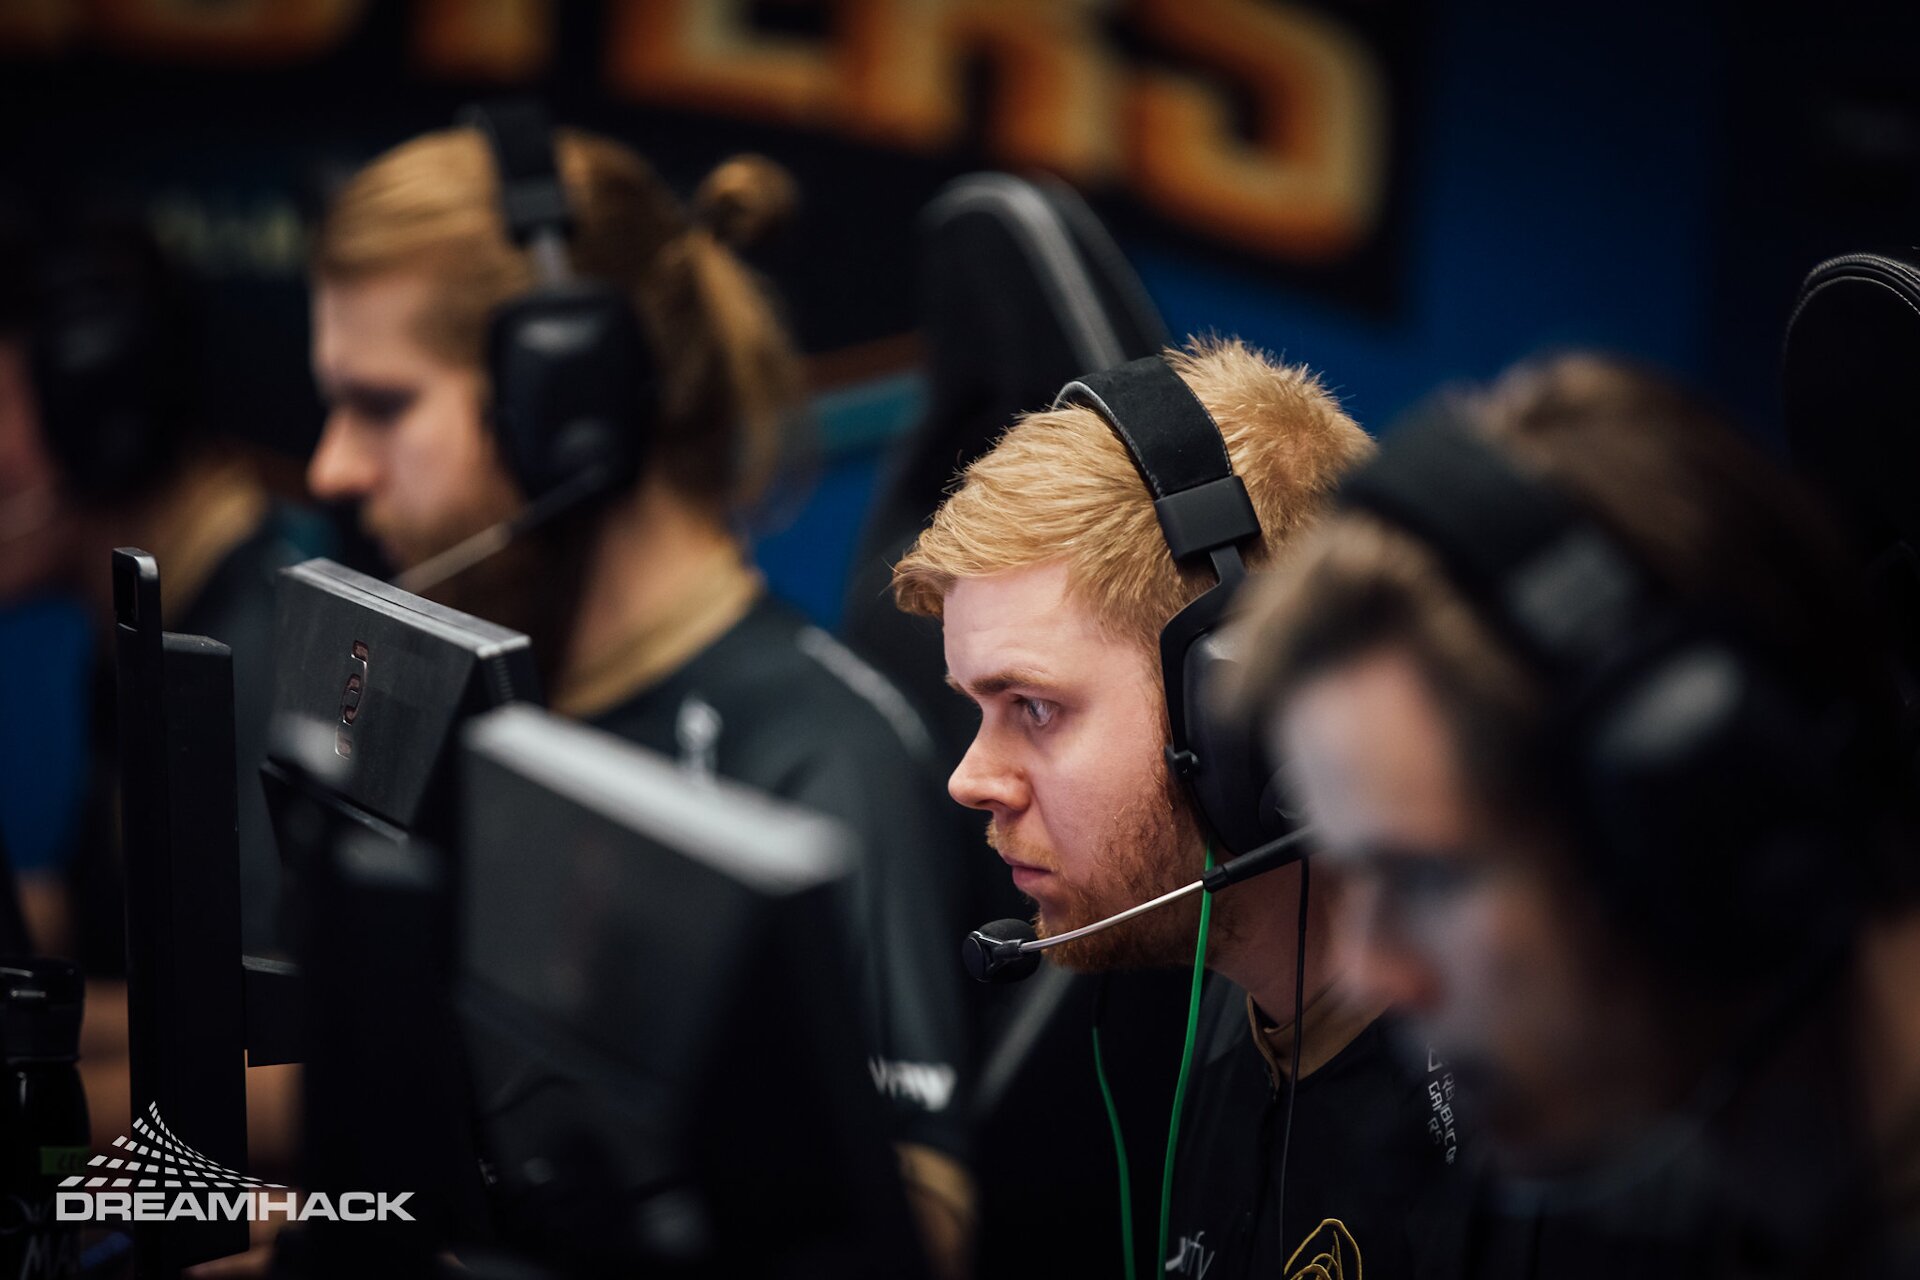 Lekr0 signs with North after being on NiP’s bench since May 2020 (Photo via Adela Sznajder - DreamHack)